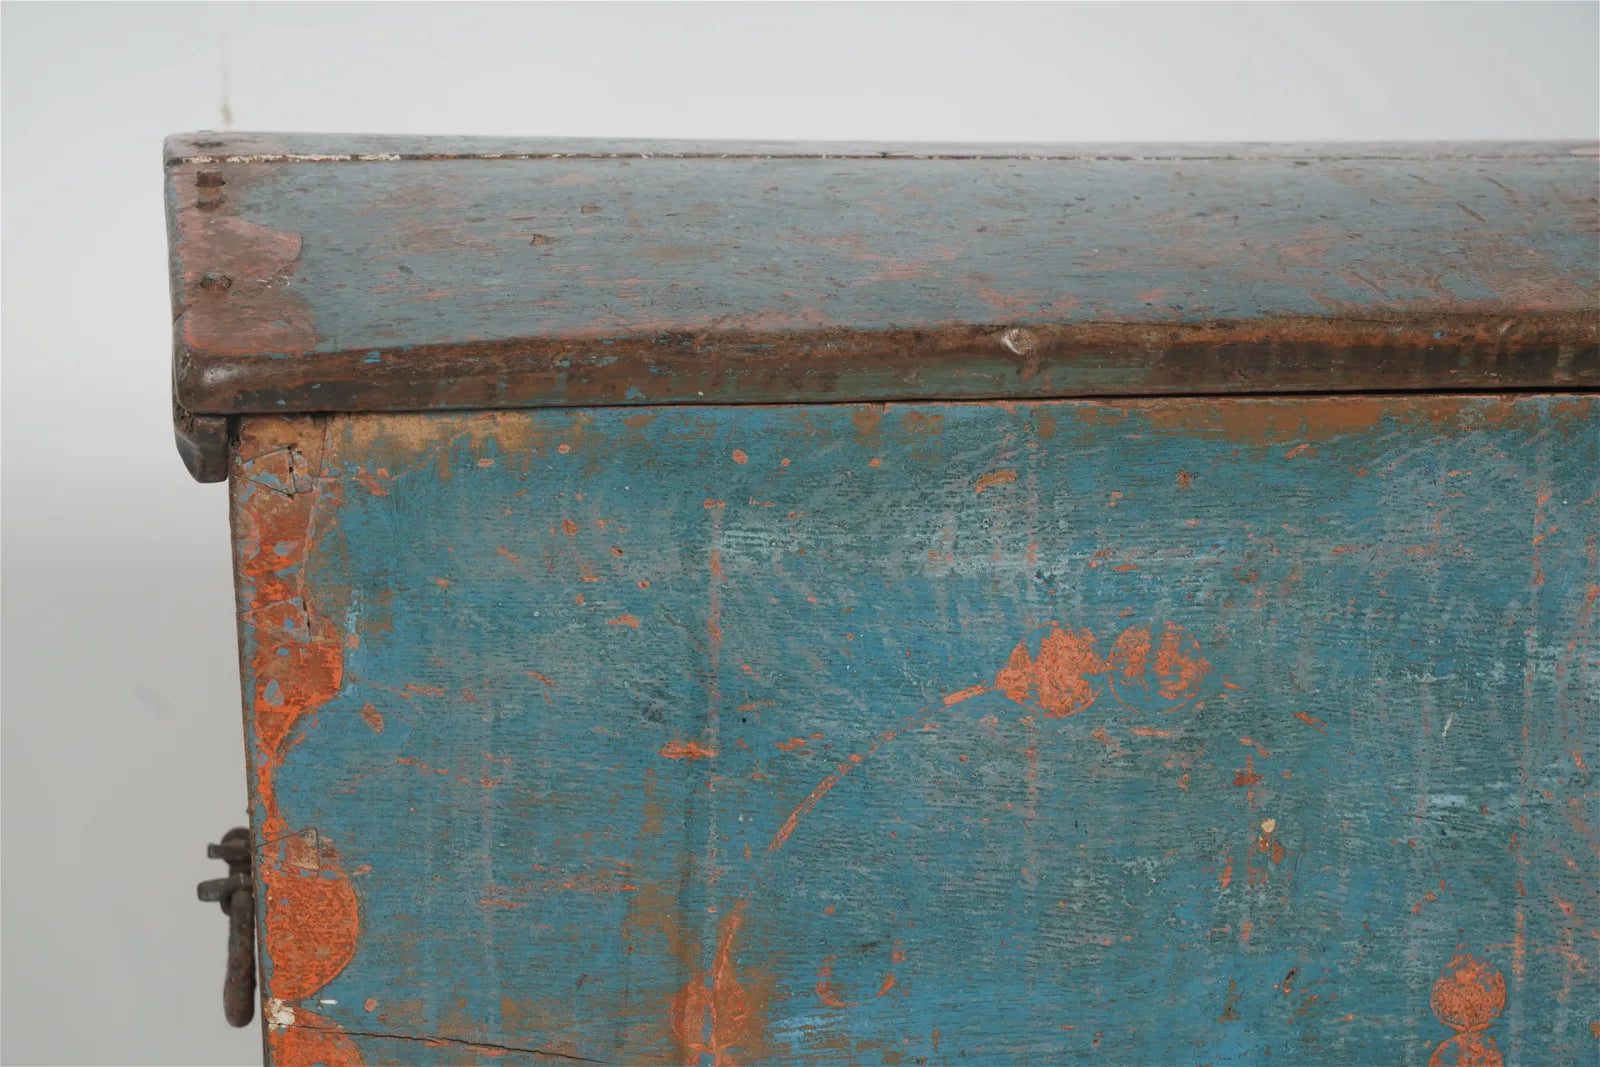 AF4-202: Antique Early 18th C American Colonial Pine Blanket Chest with Original Blue Painted Finish